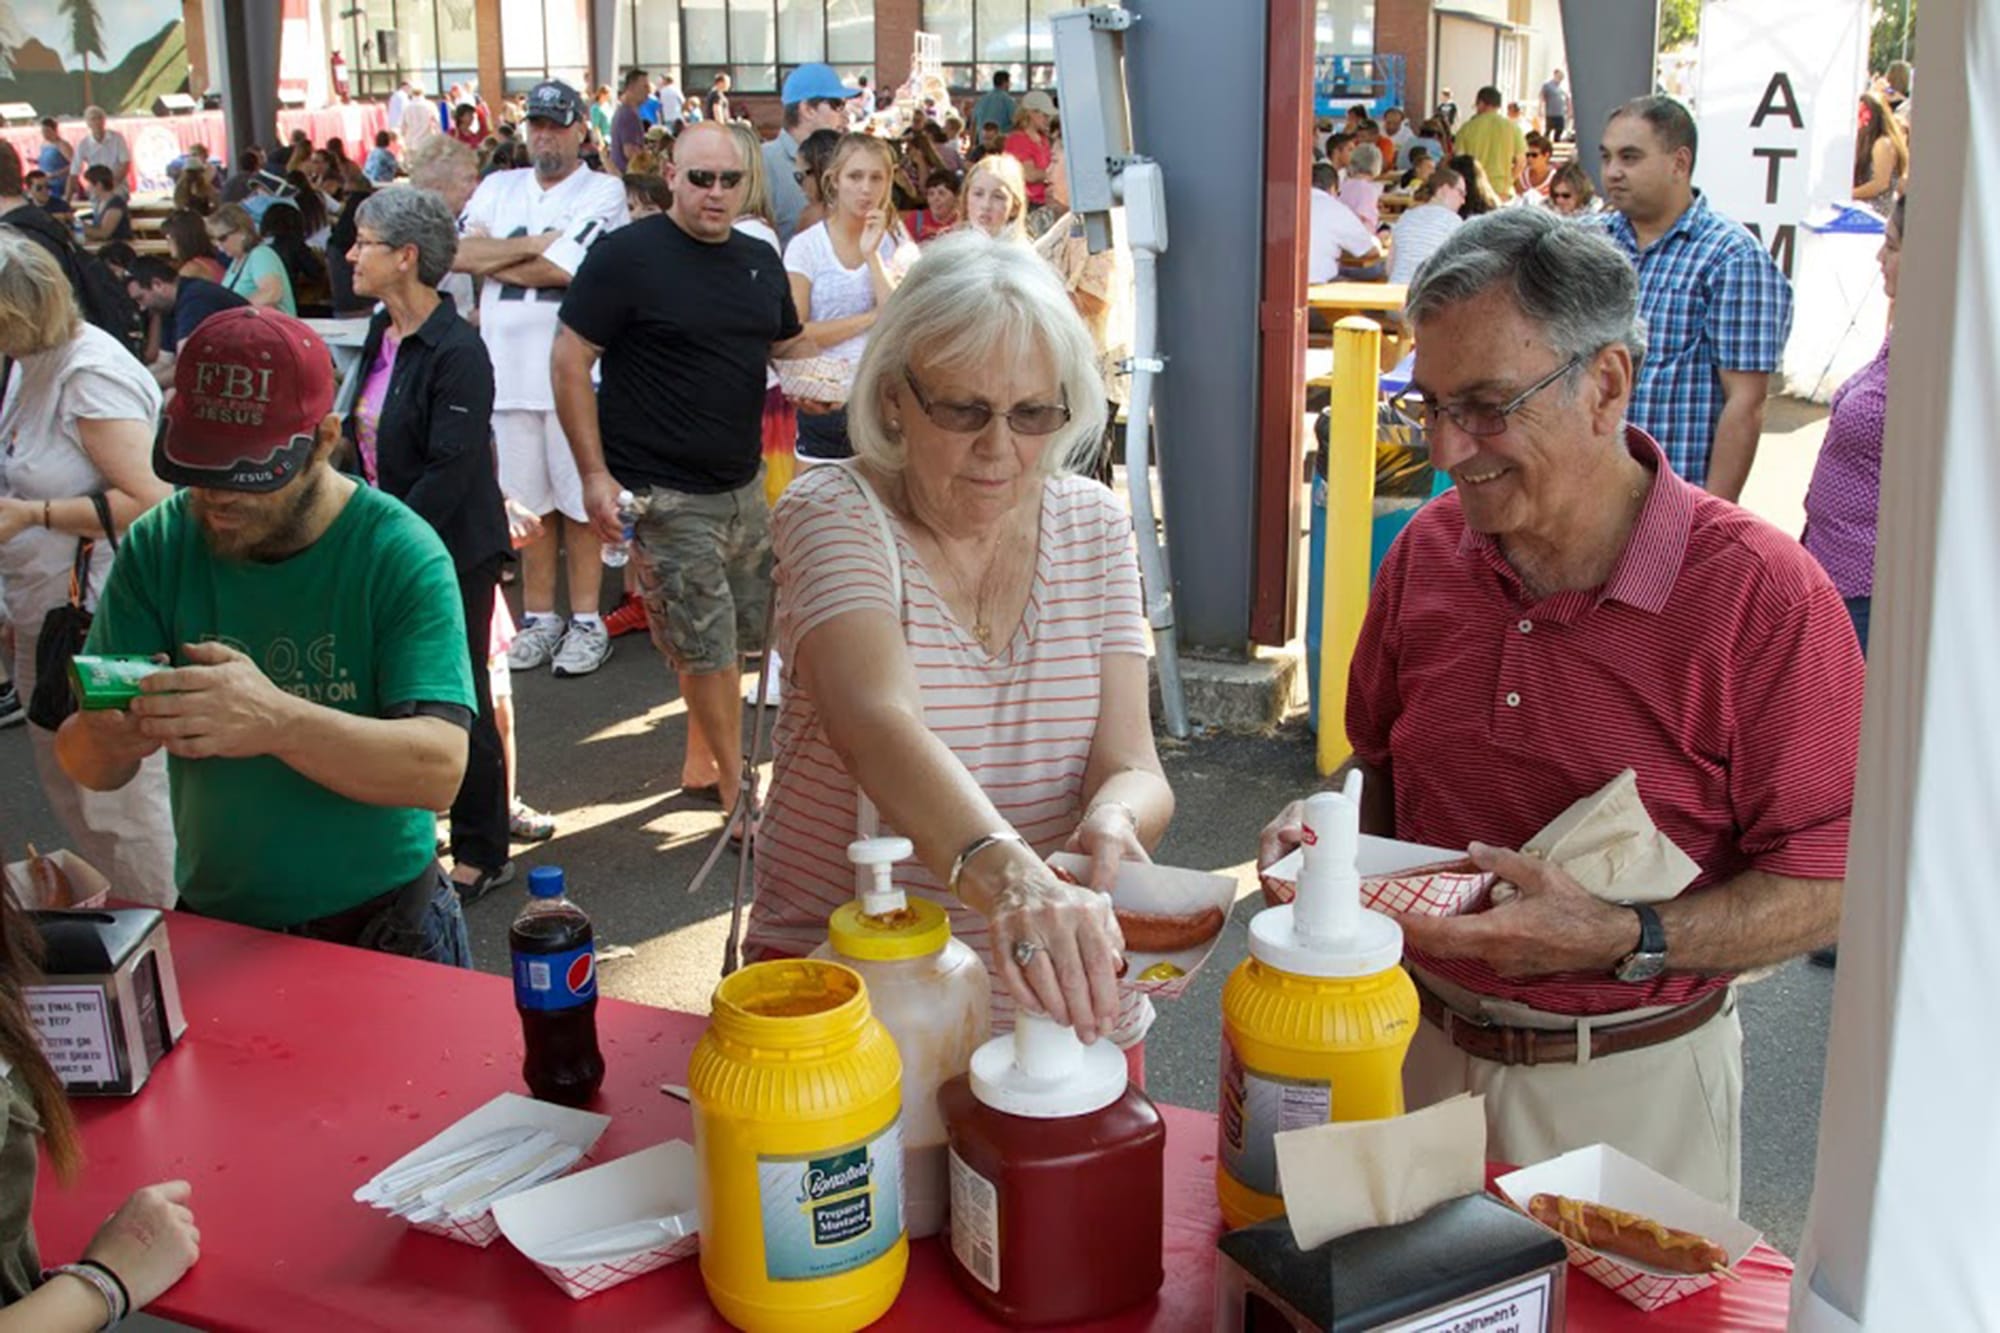 Liz and Raif Zacca of Vancouver get condiments for their sausages at the Vancouver Sausage Fest on Sunday. The two attend St.